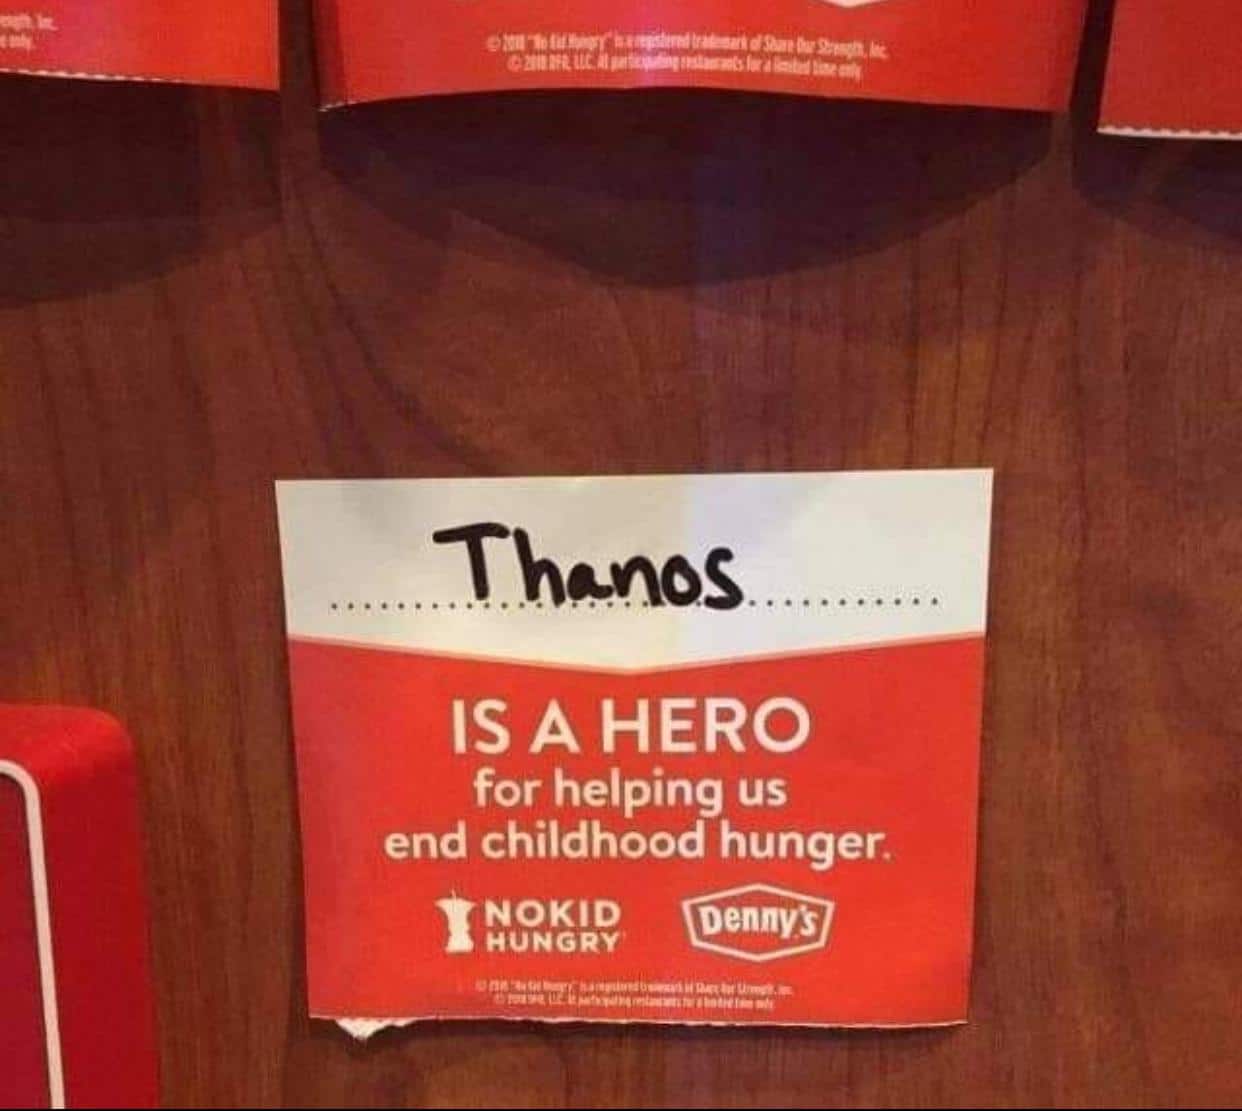 thanos avengers-memes thanos text: ISA HERO for helping us end childhood hunger NOKID oennyS HUNGRY 